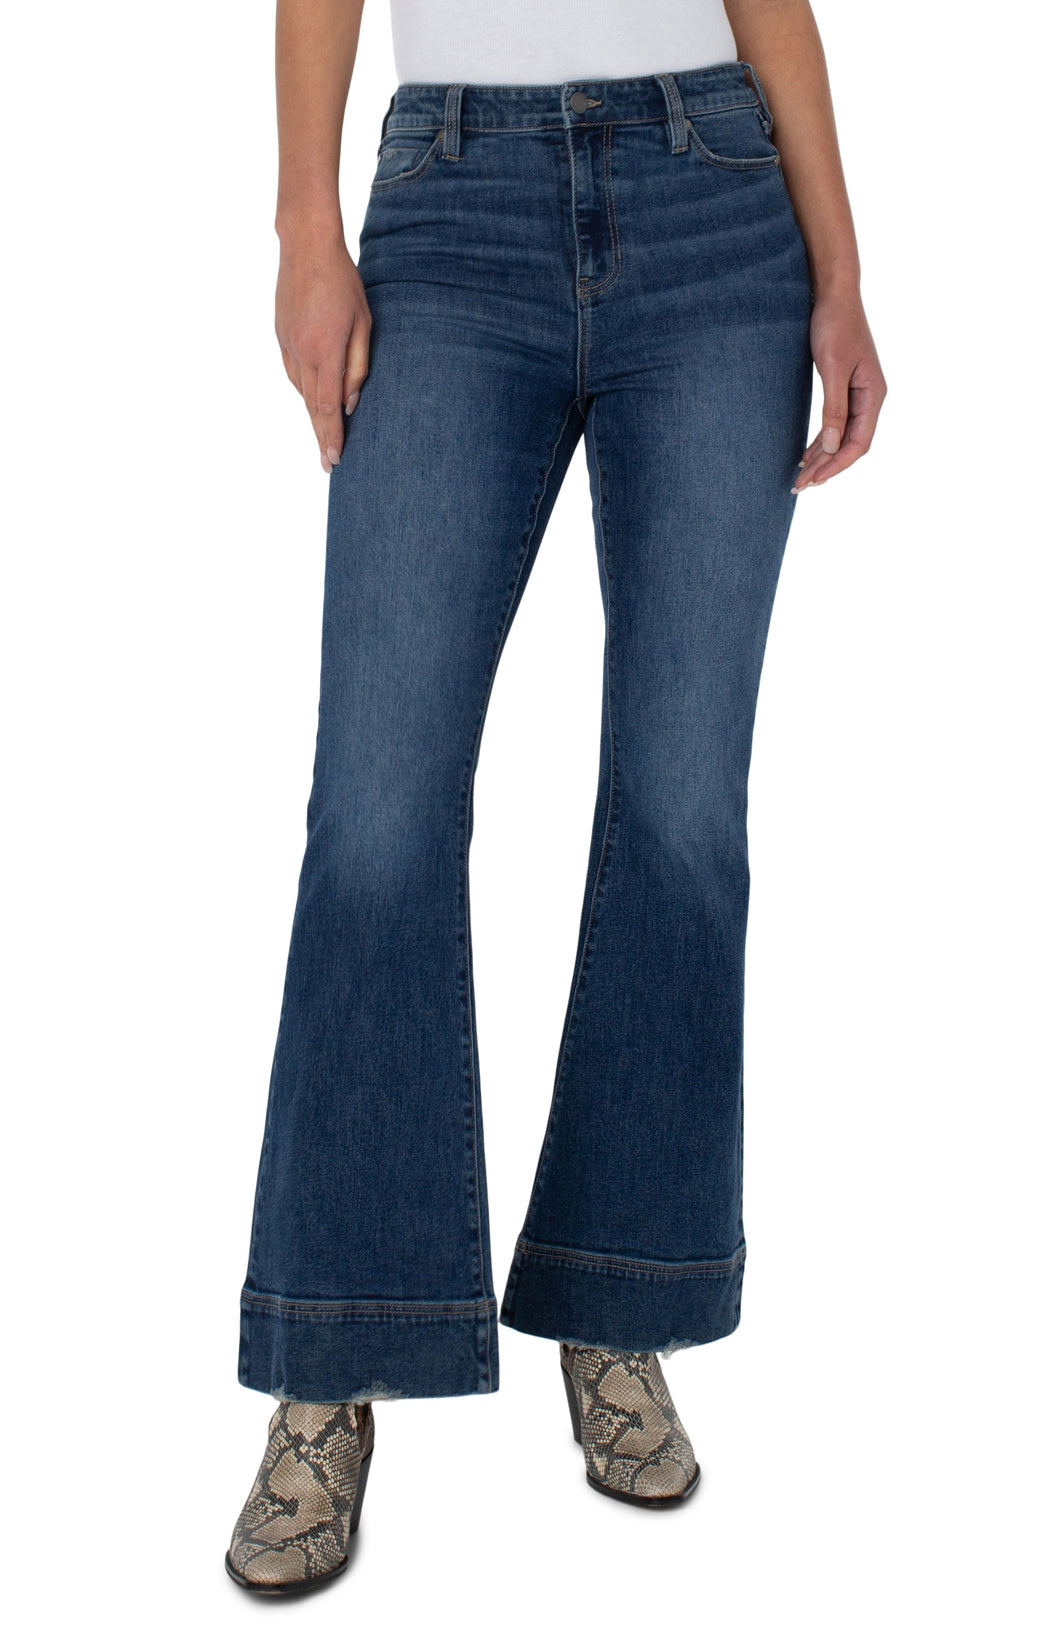 Our Hannah High Rise Flare Jean offers a flattering fit with just the right amount of edginess! The Hannah in a must-have Chatfield wash features a wide hem, a slimmer fit through the thighs and flares at the bottom creating a beautiful bootcut/flare shape.  This modern eco jean was designed using new laser techniques and processes that uses a fraction of our natural resources.  Color- Chatfied. 34'' Inseam Hi-Rise 11-1/8